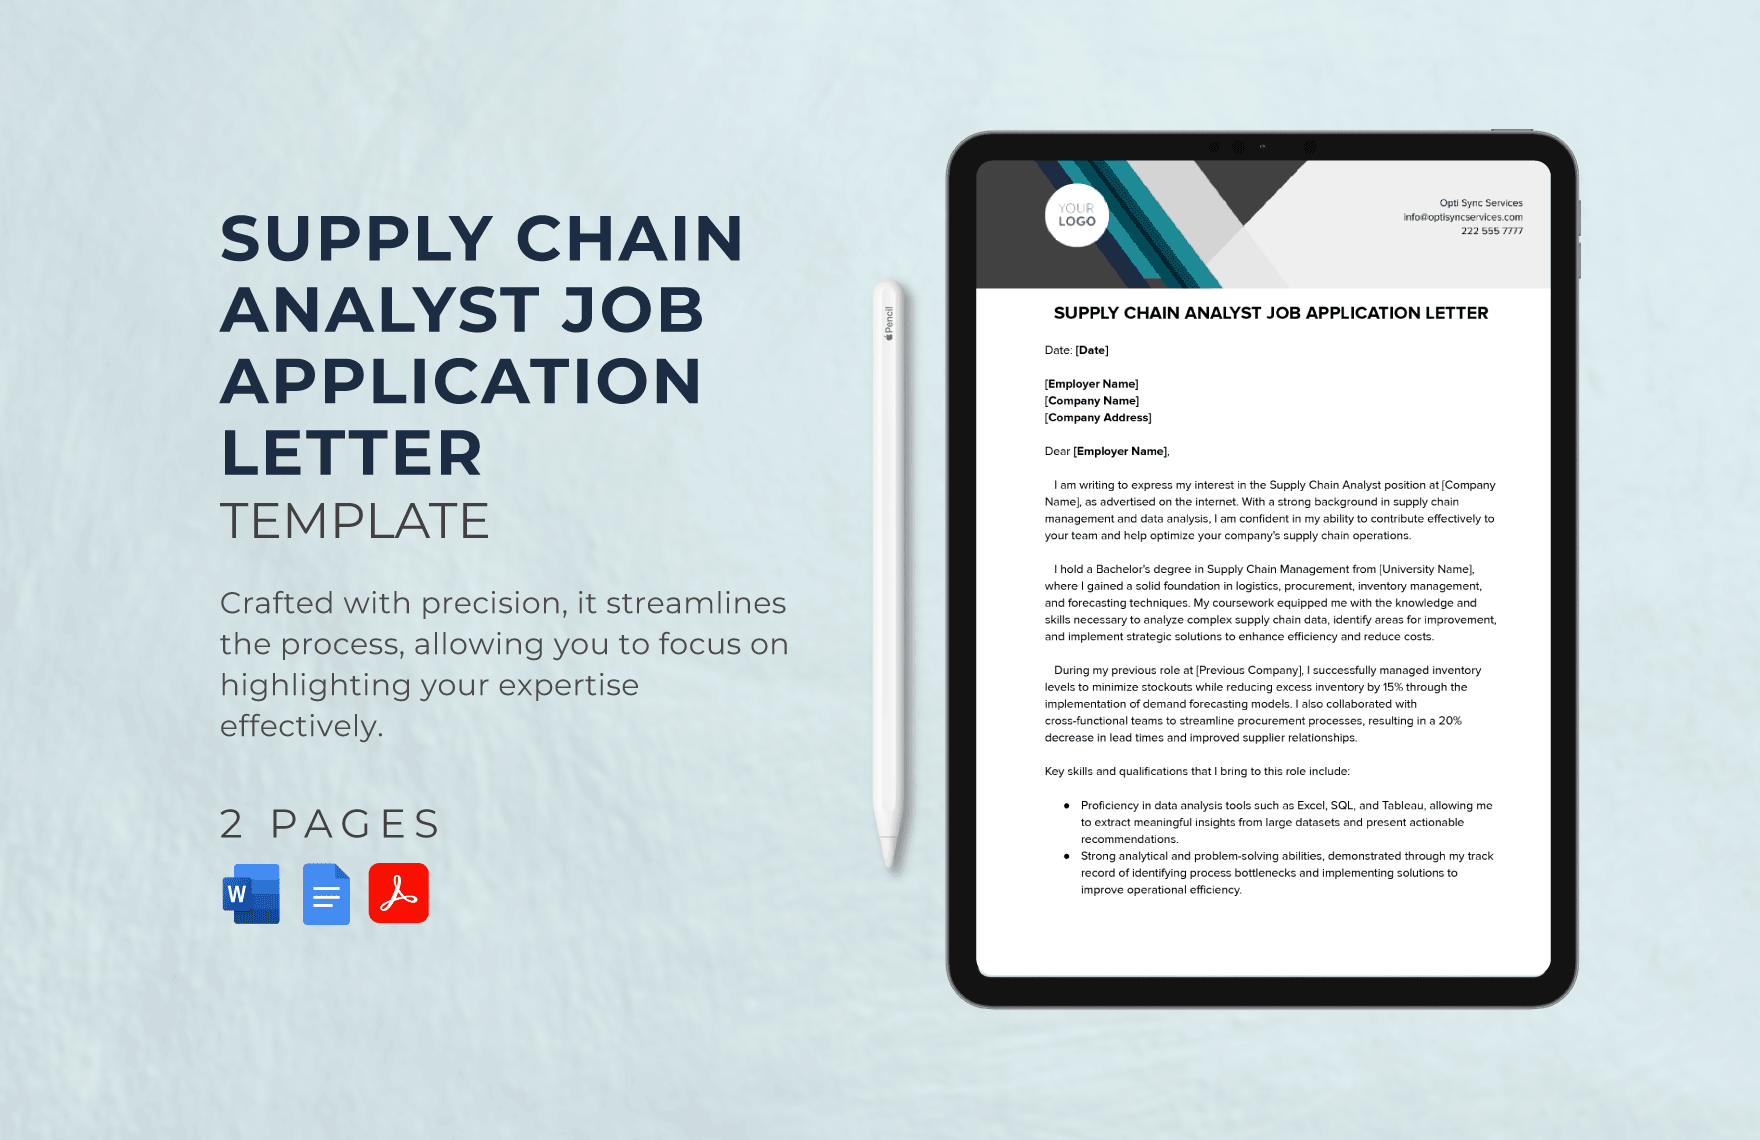 Supply Chain Analyst Job Application Letter Template